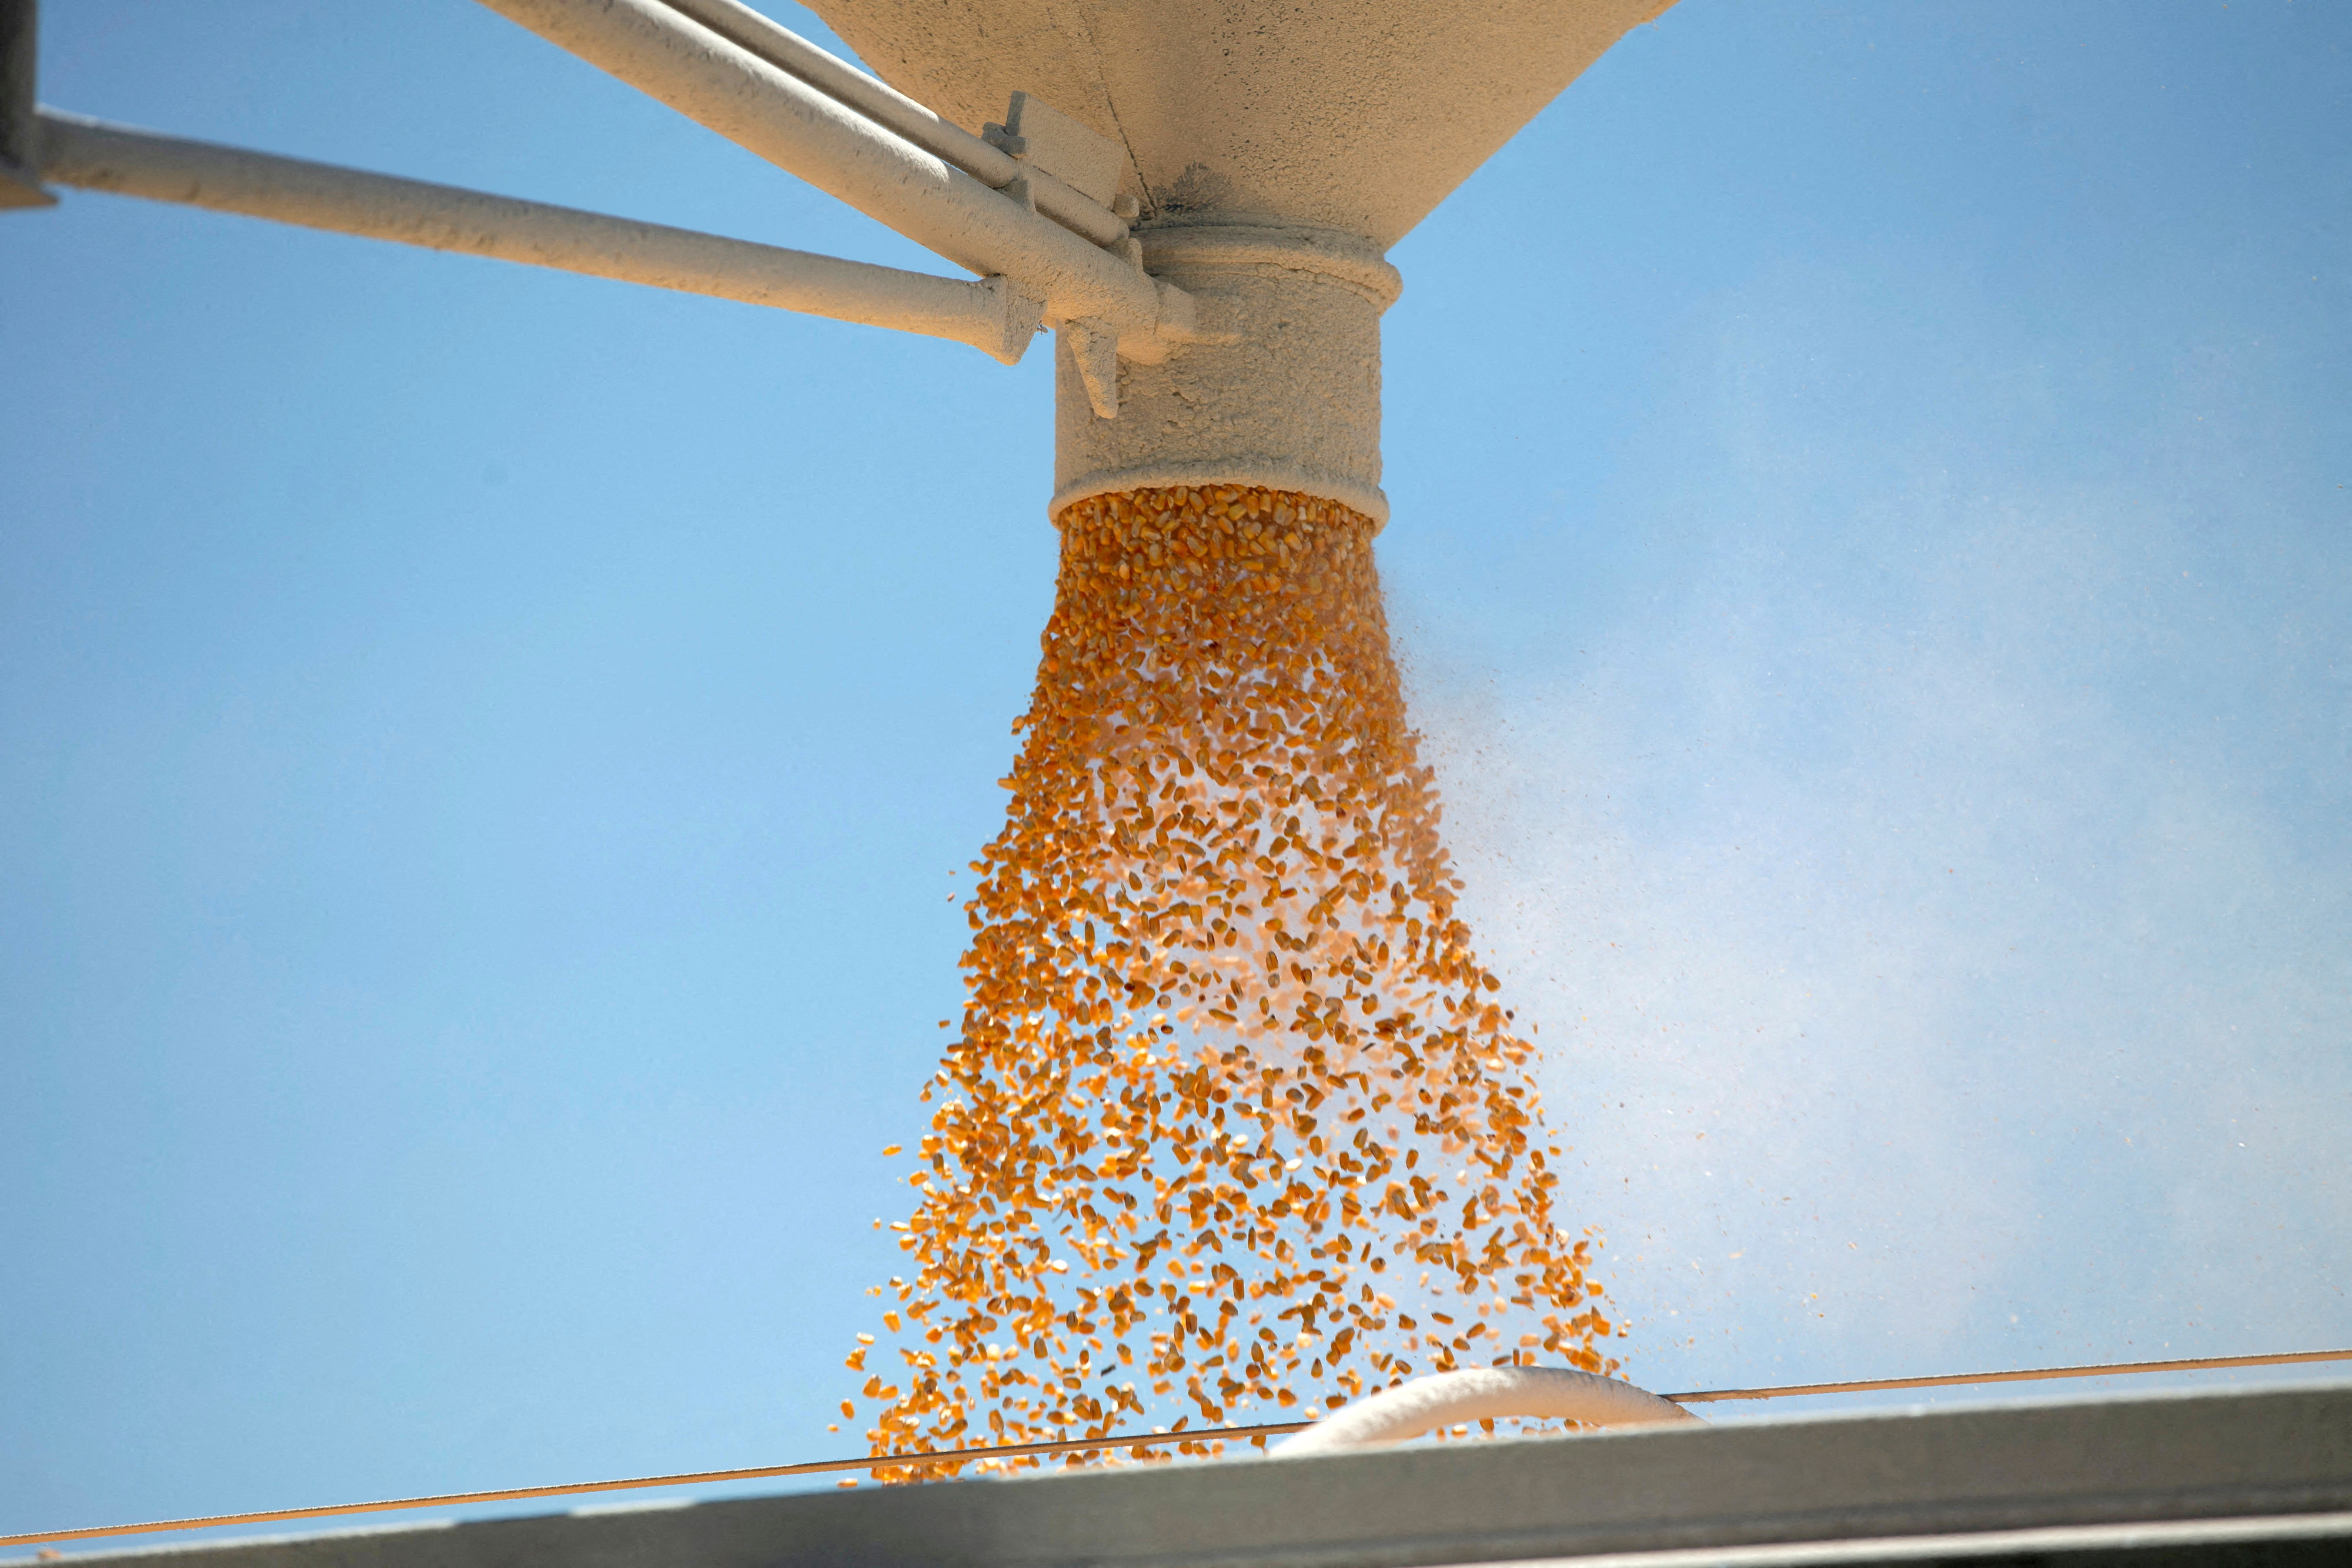 More corn grown in U.S. this year than ever before. Thanks